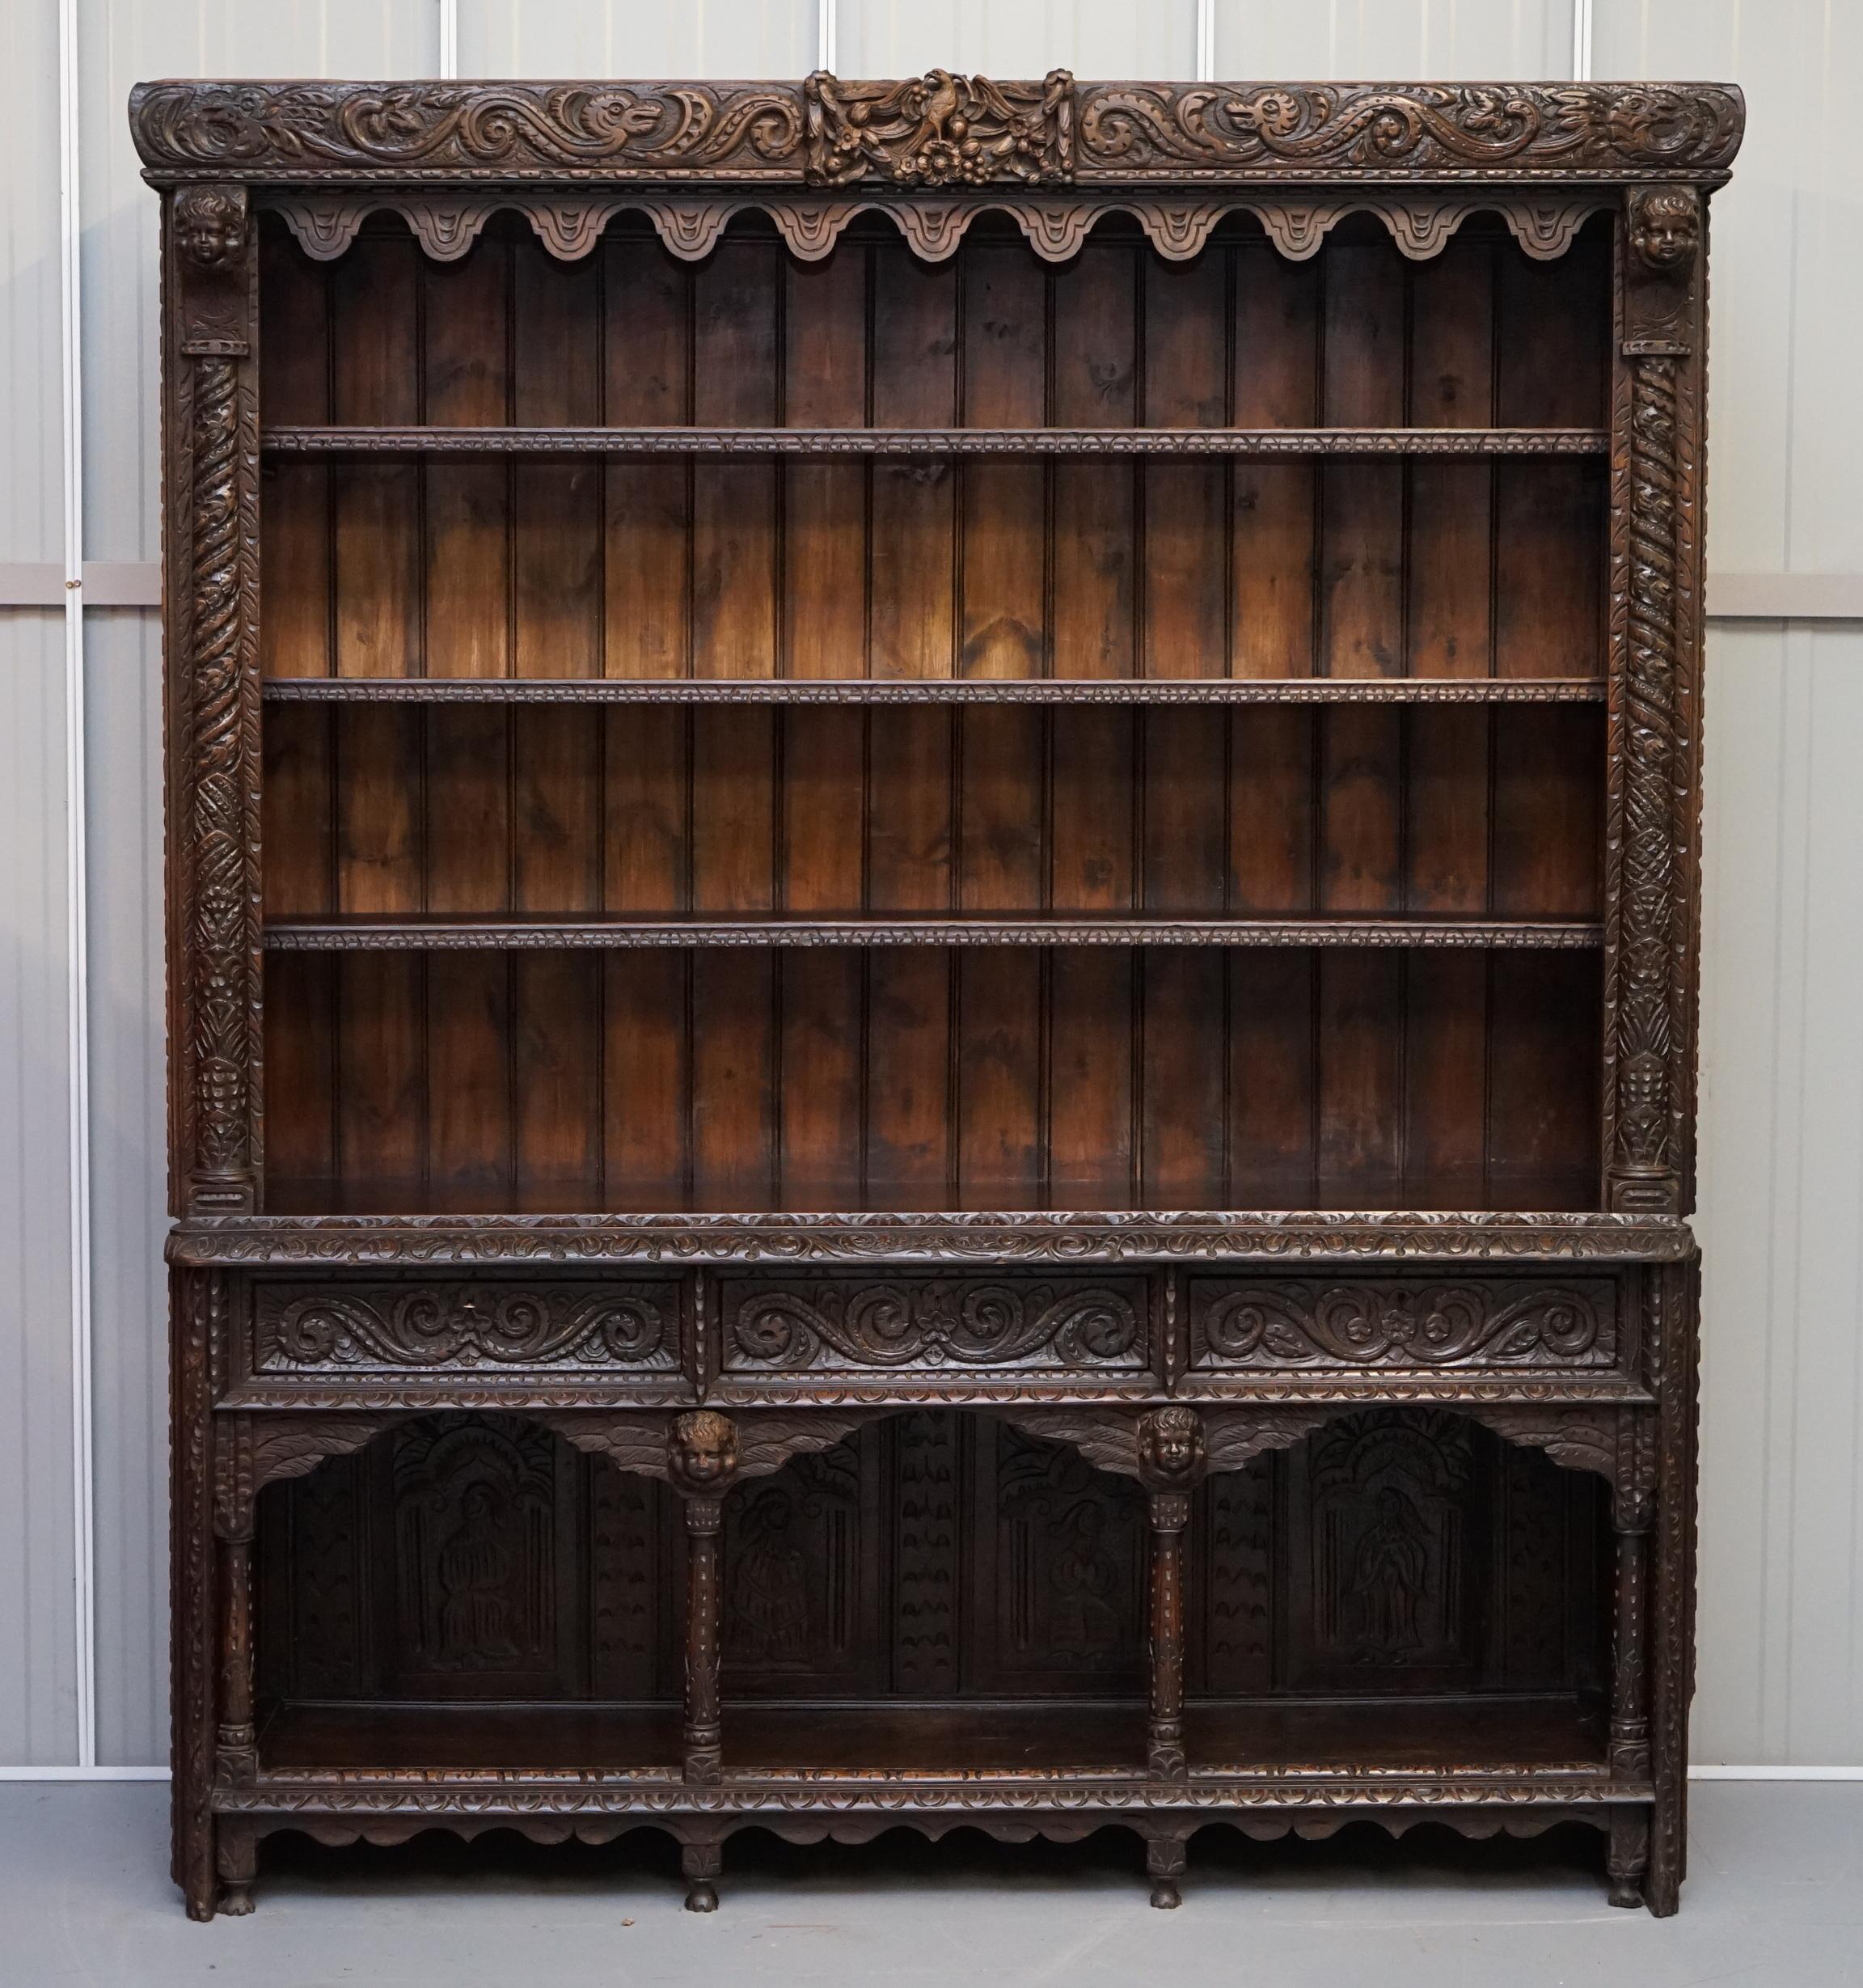 We are delighted to offer for sale this rare and important Gothic Revival circa 1860 bookcase dresser made using period 17th century paneling

This piece is really quite rare, the craftsmanship is sublime, what you have here is some very old